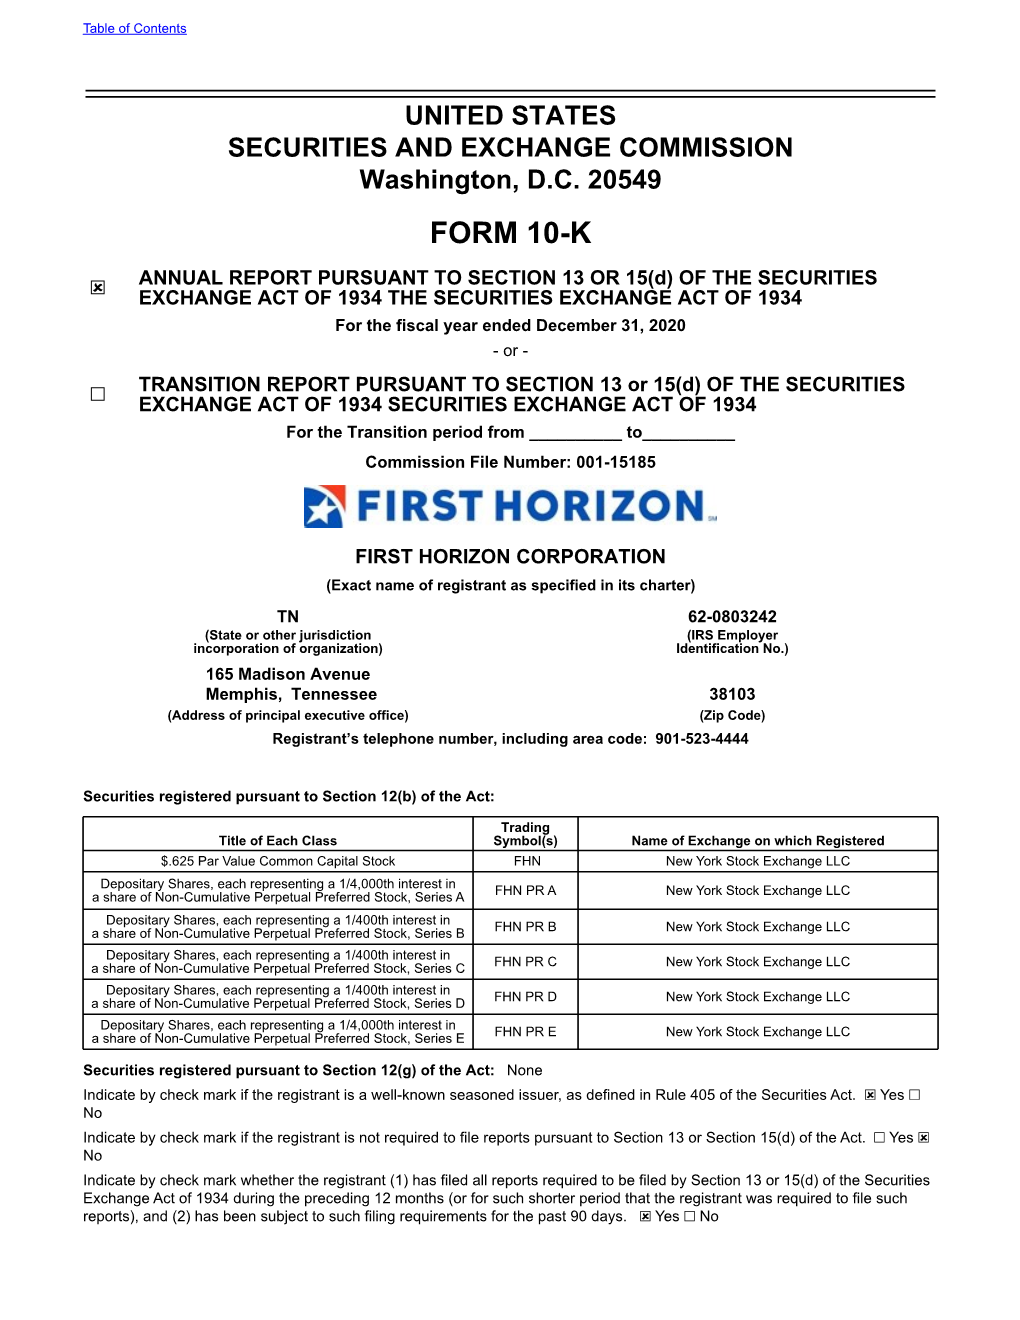 FHN 10K FY2020 Document